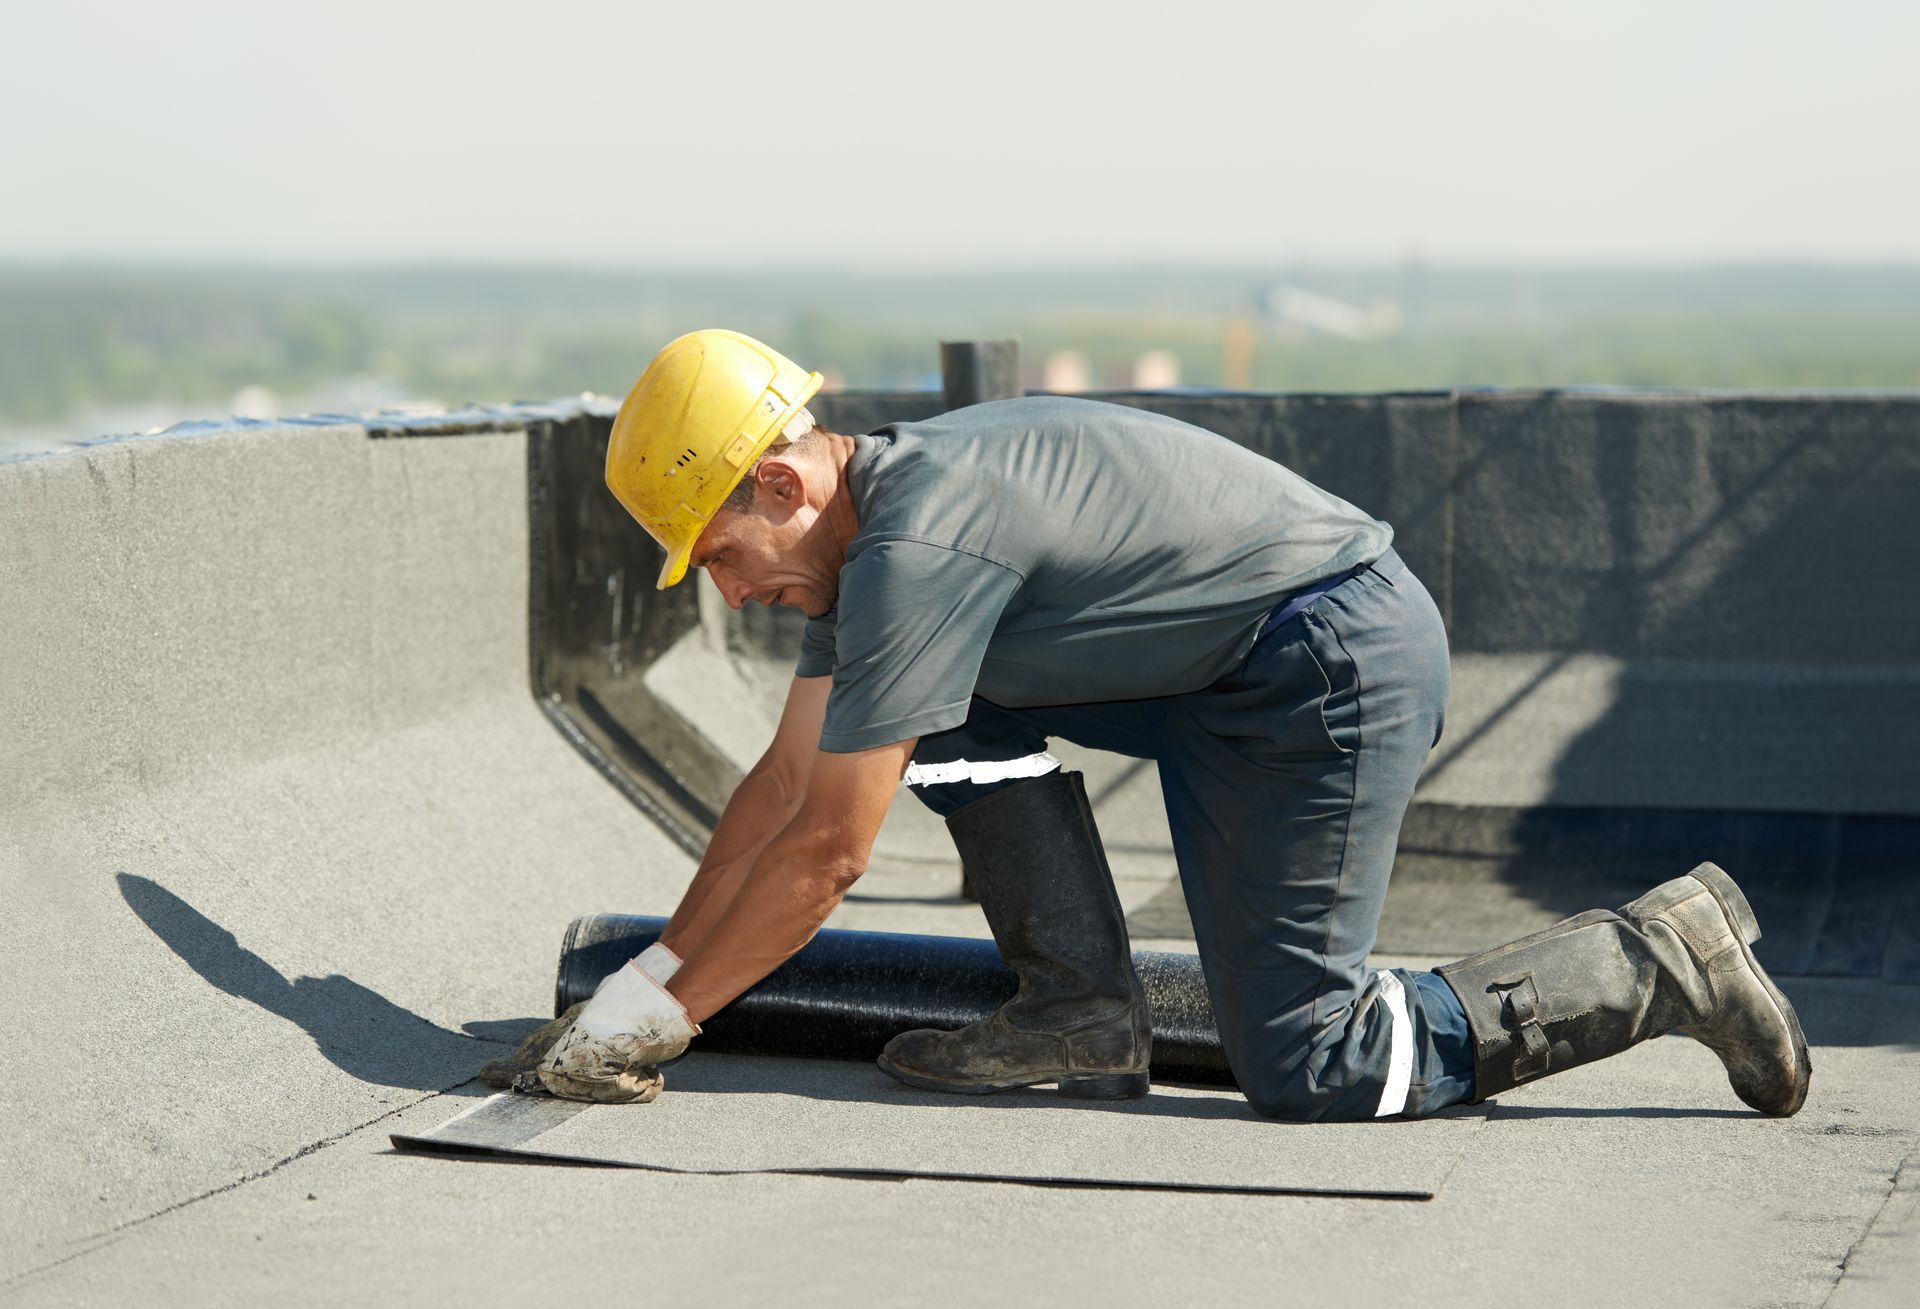 A worker applying roofing felt on a flat roof surface, ensuring proper insulation and waterproofing.